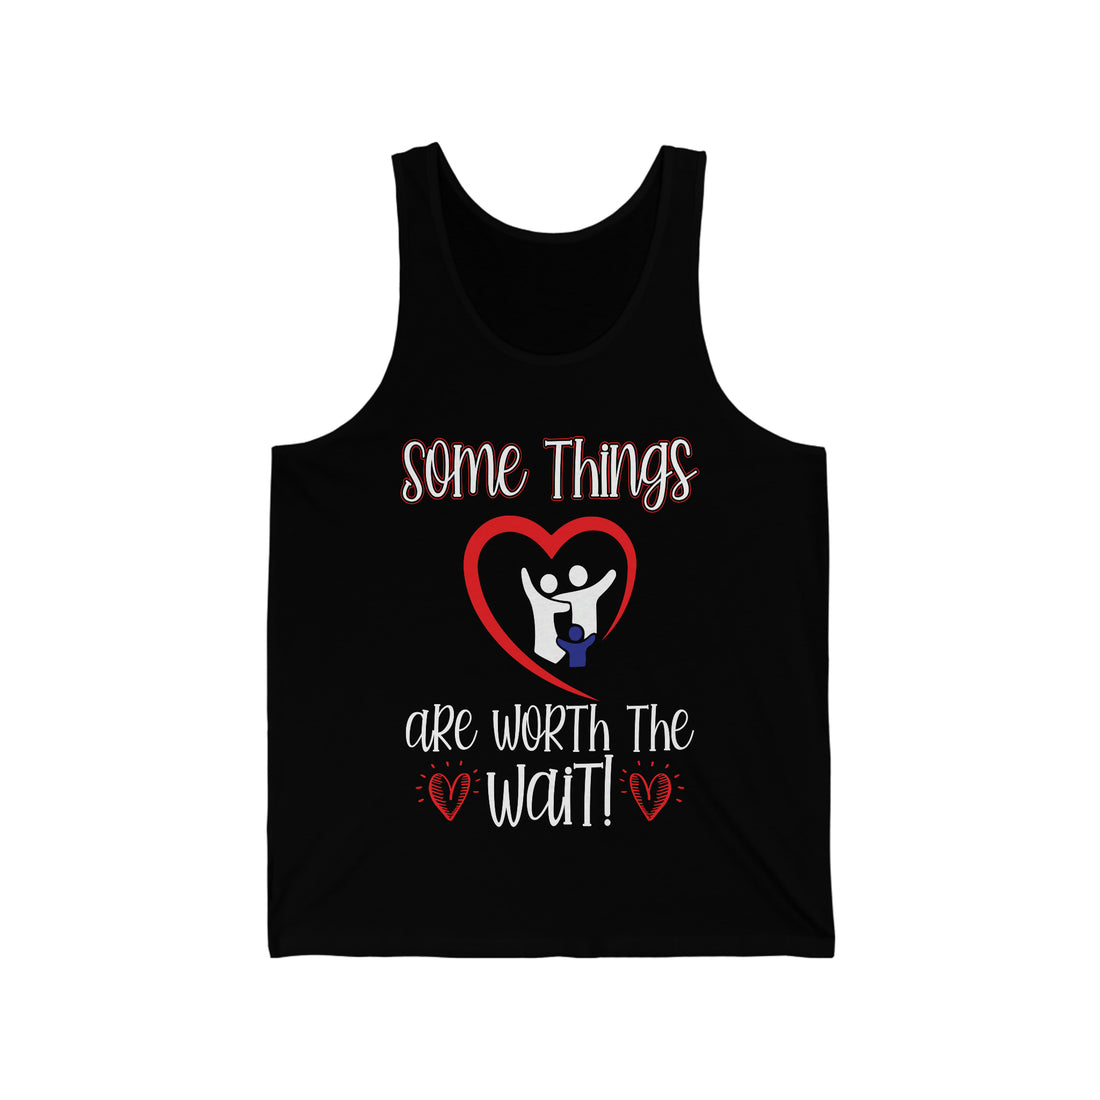 Some Things Are Worth The Wait - Unisex Jersey Tank Top